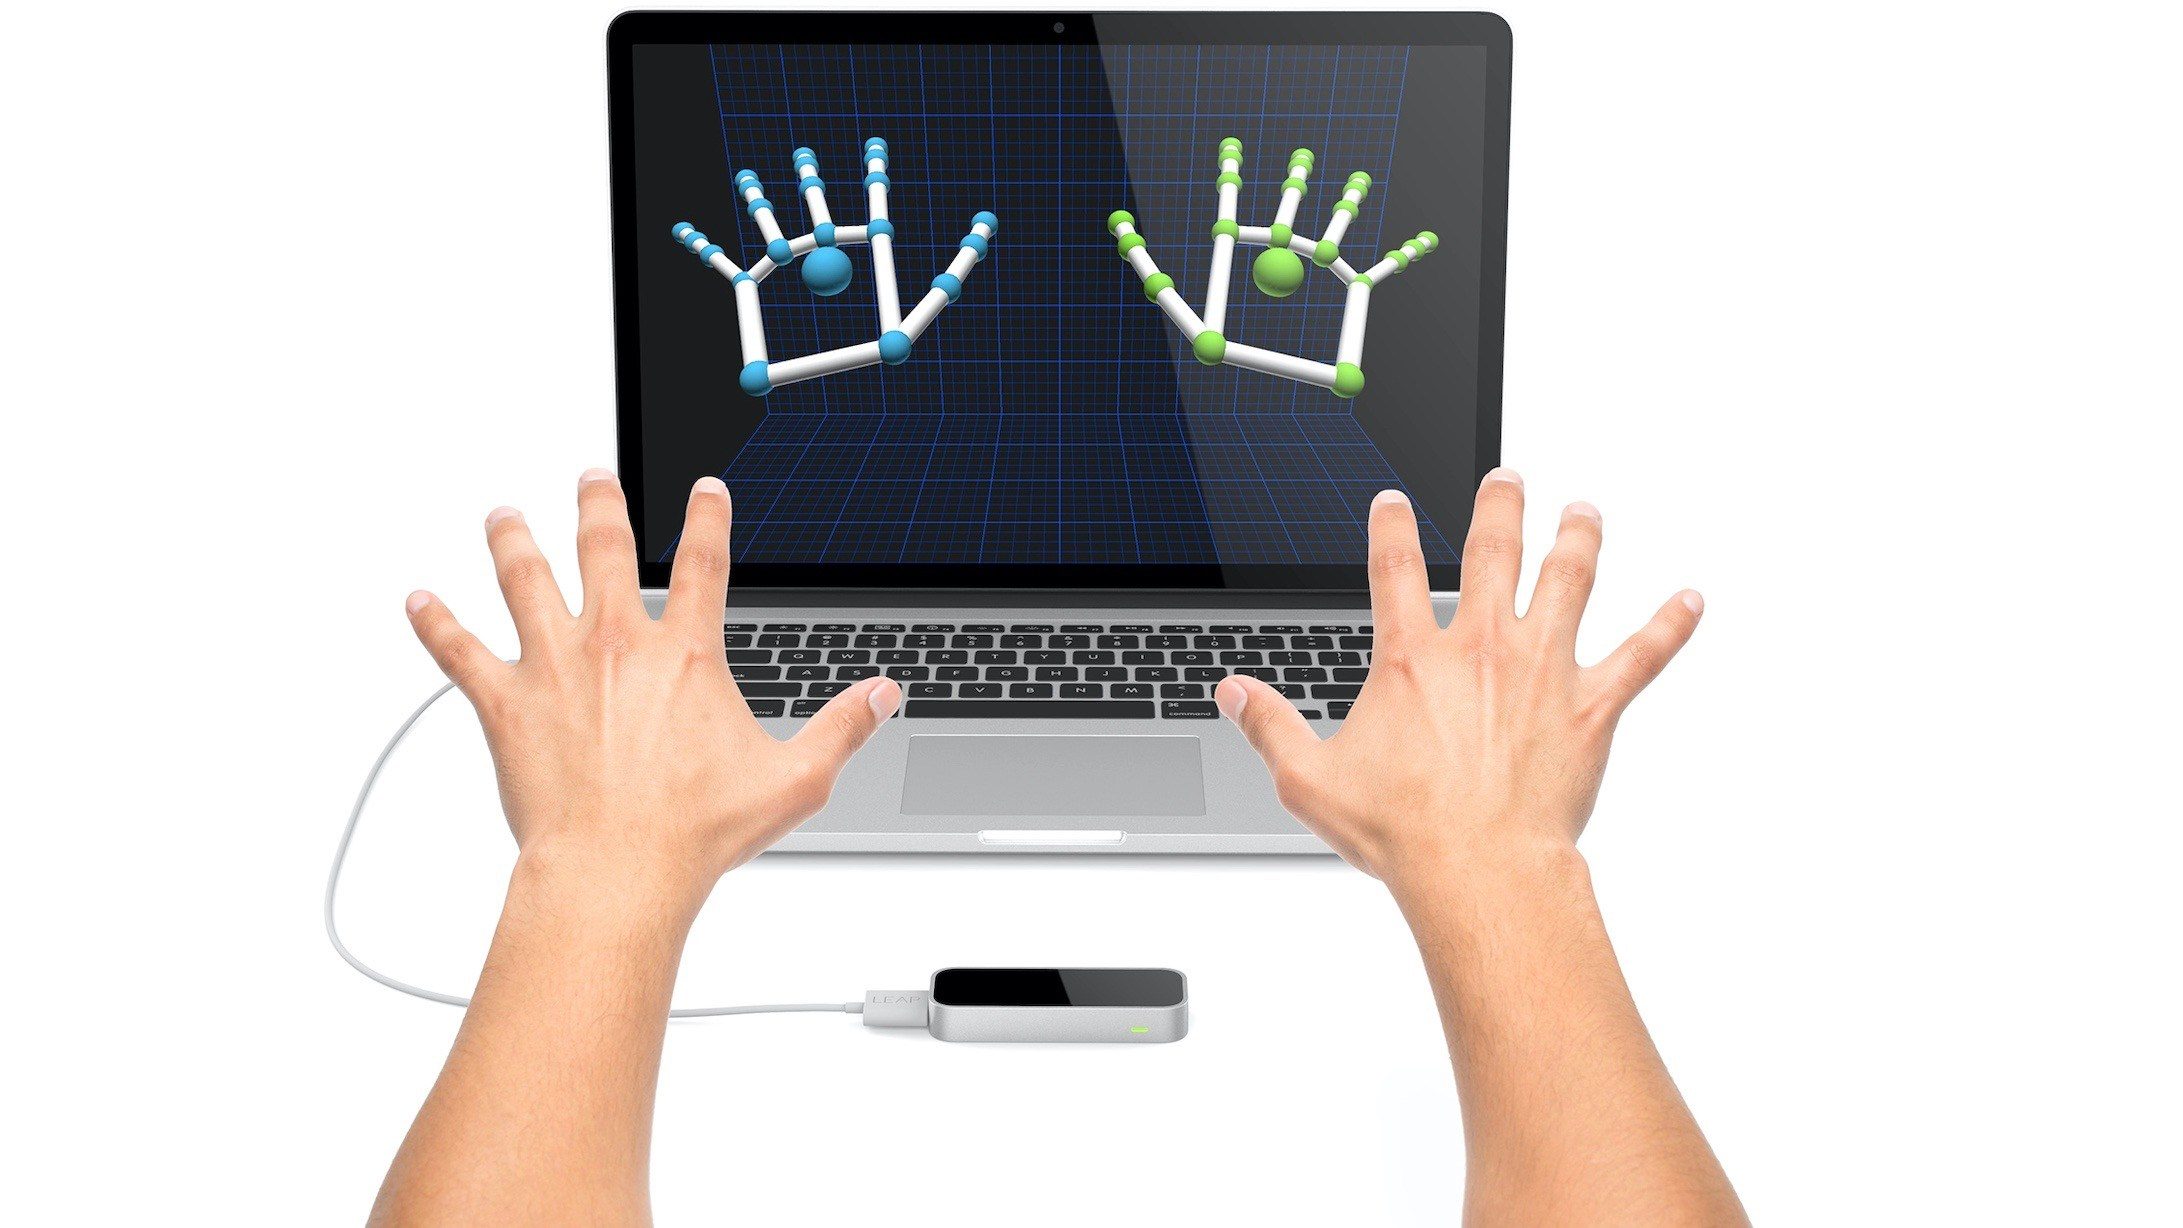 iclone leap motion